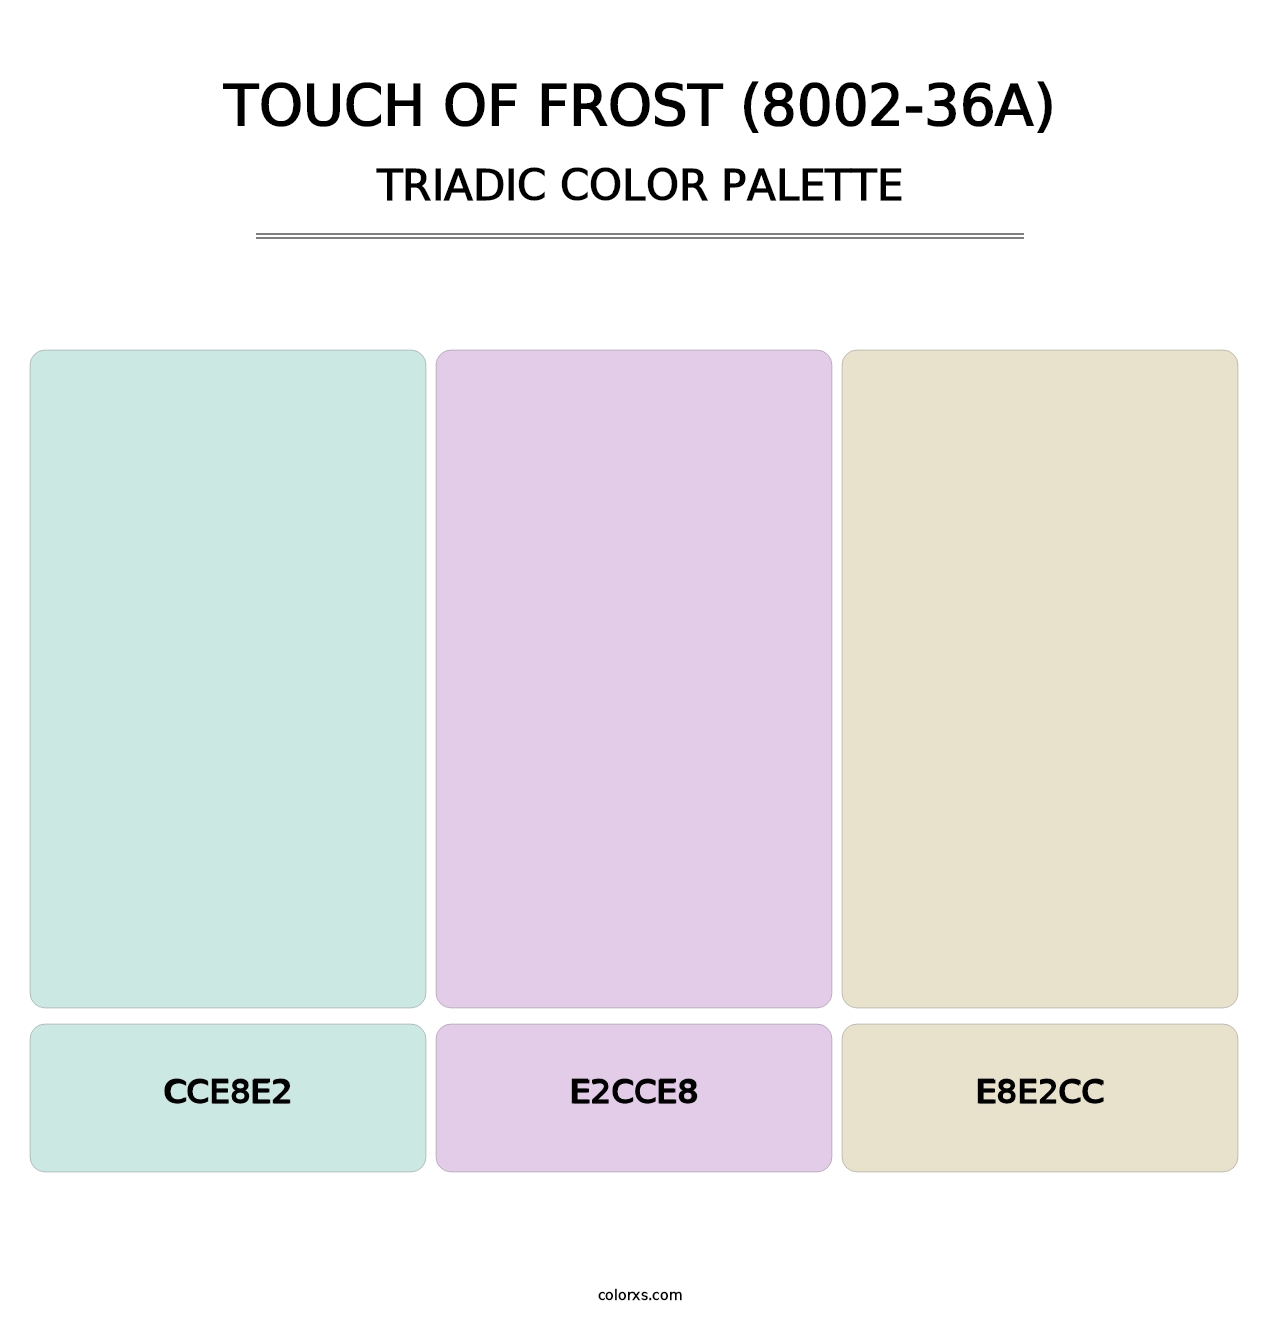 Touch of Frost (8002-36A) - Triadic Color Palette